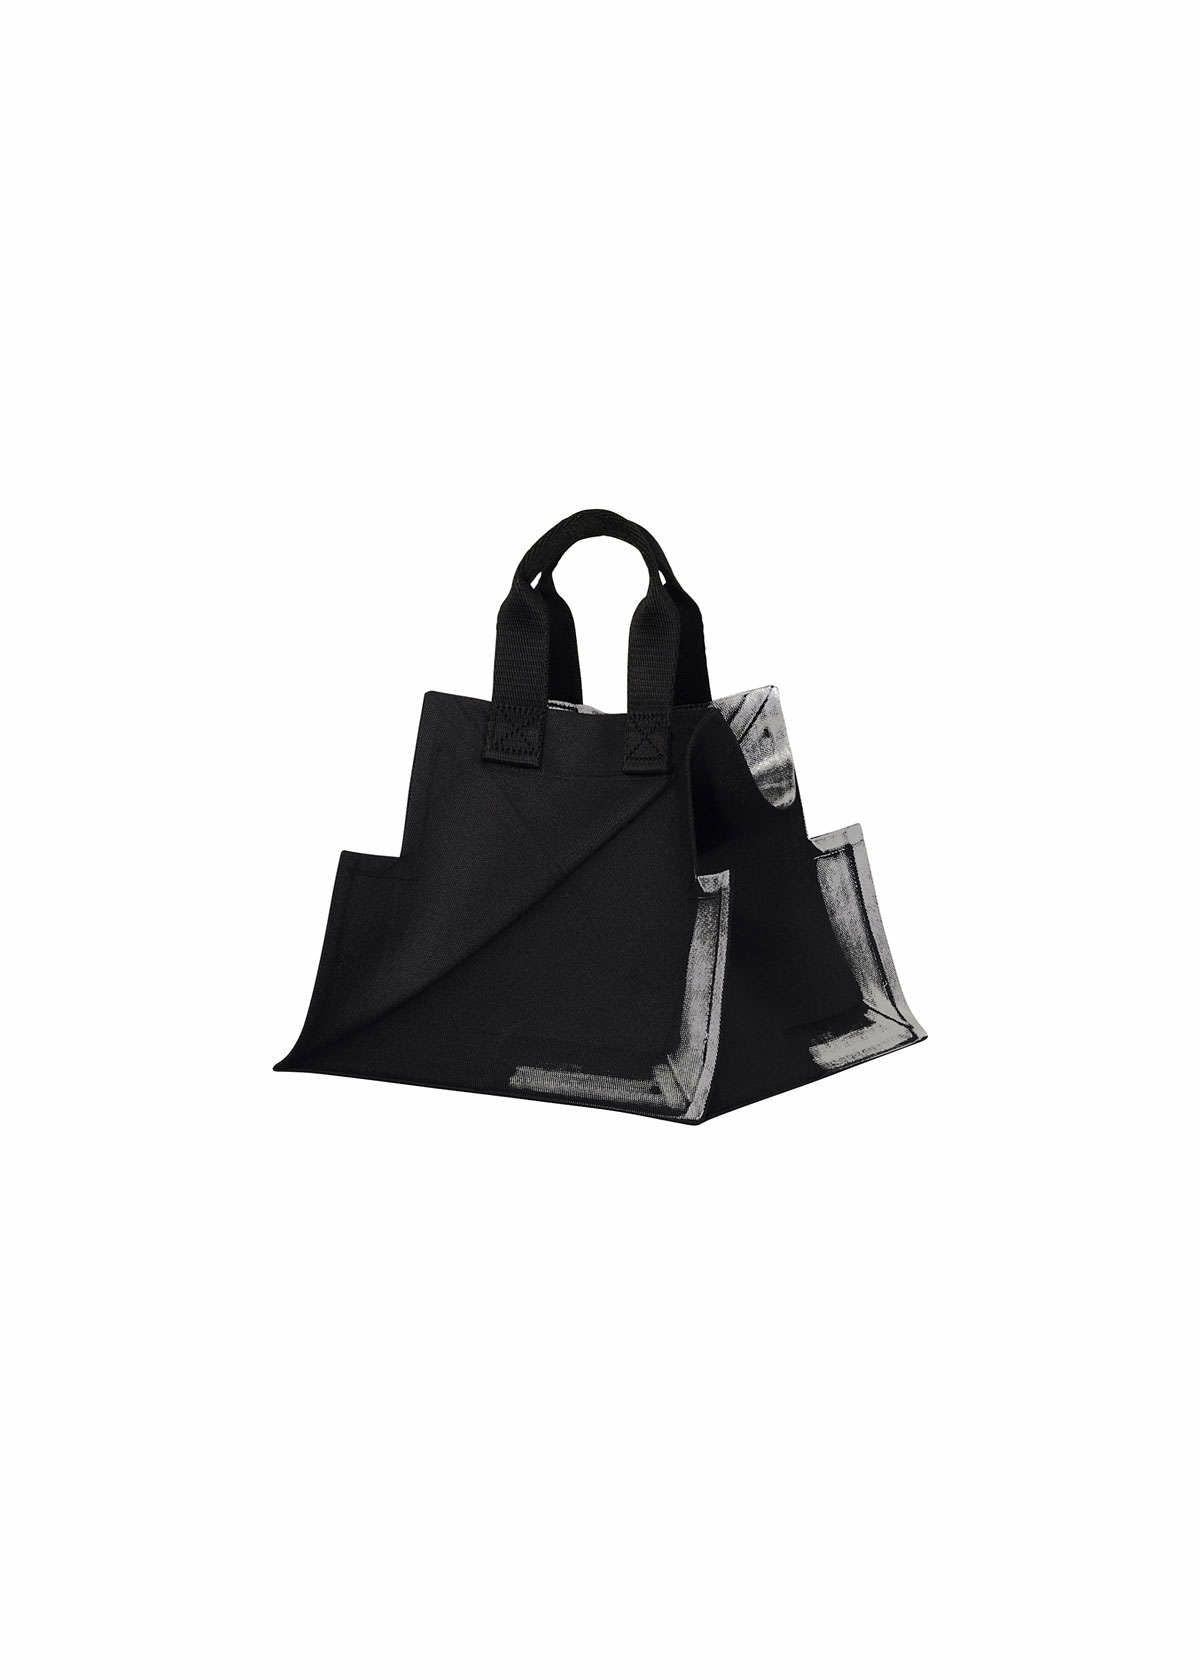 132 5. STANDARD BAG 13 | The official ISSEY MIYAKE ONLINE STORE 